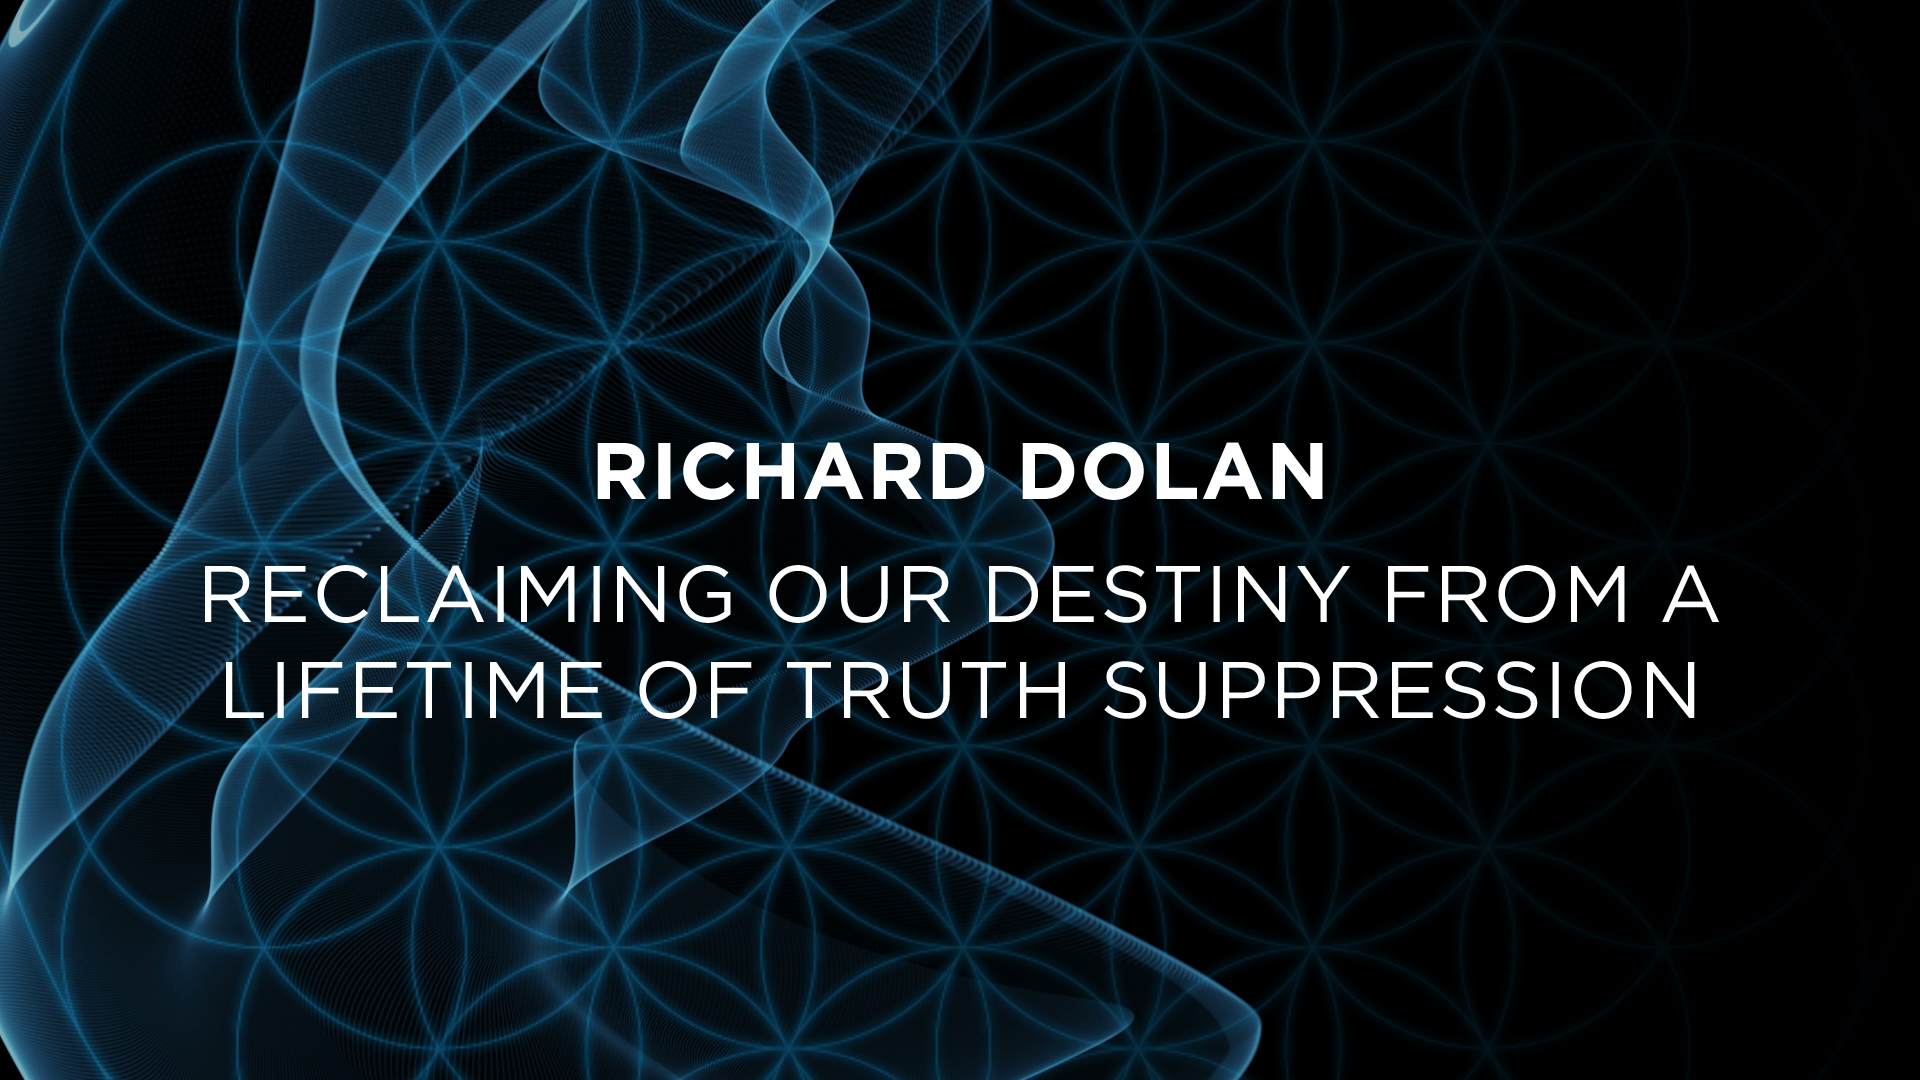 Richard Dolan : Reclaiming our Destiny from a Lifetime of Truth Suppression